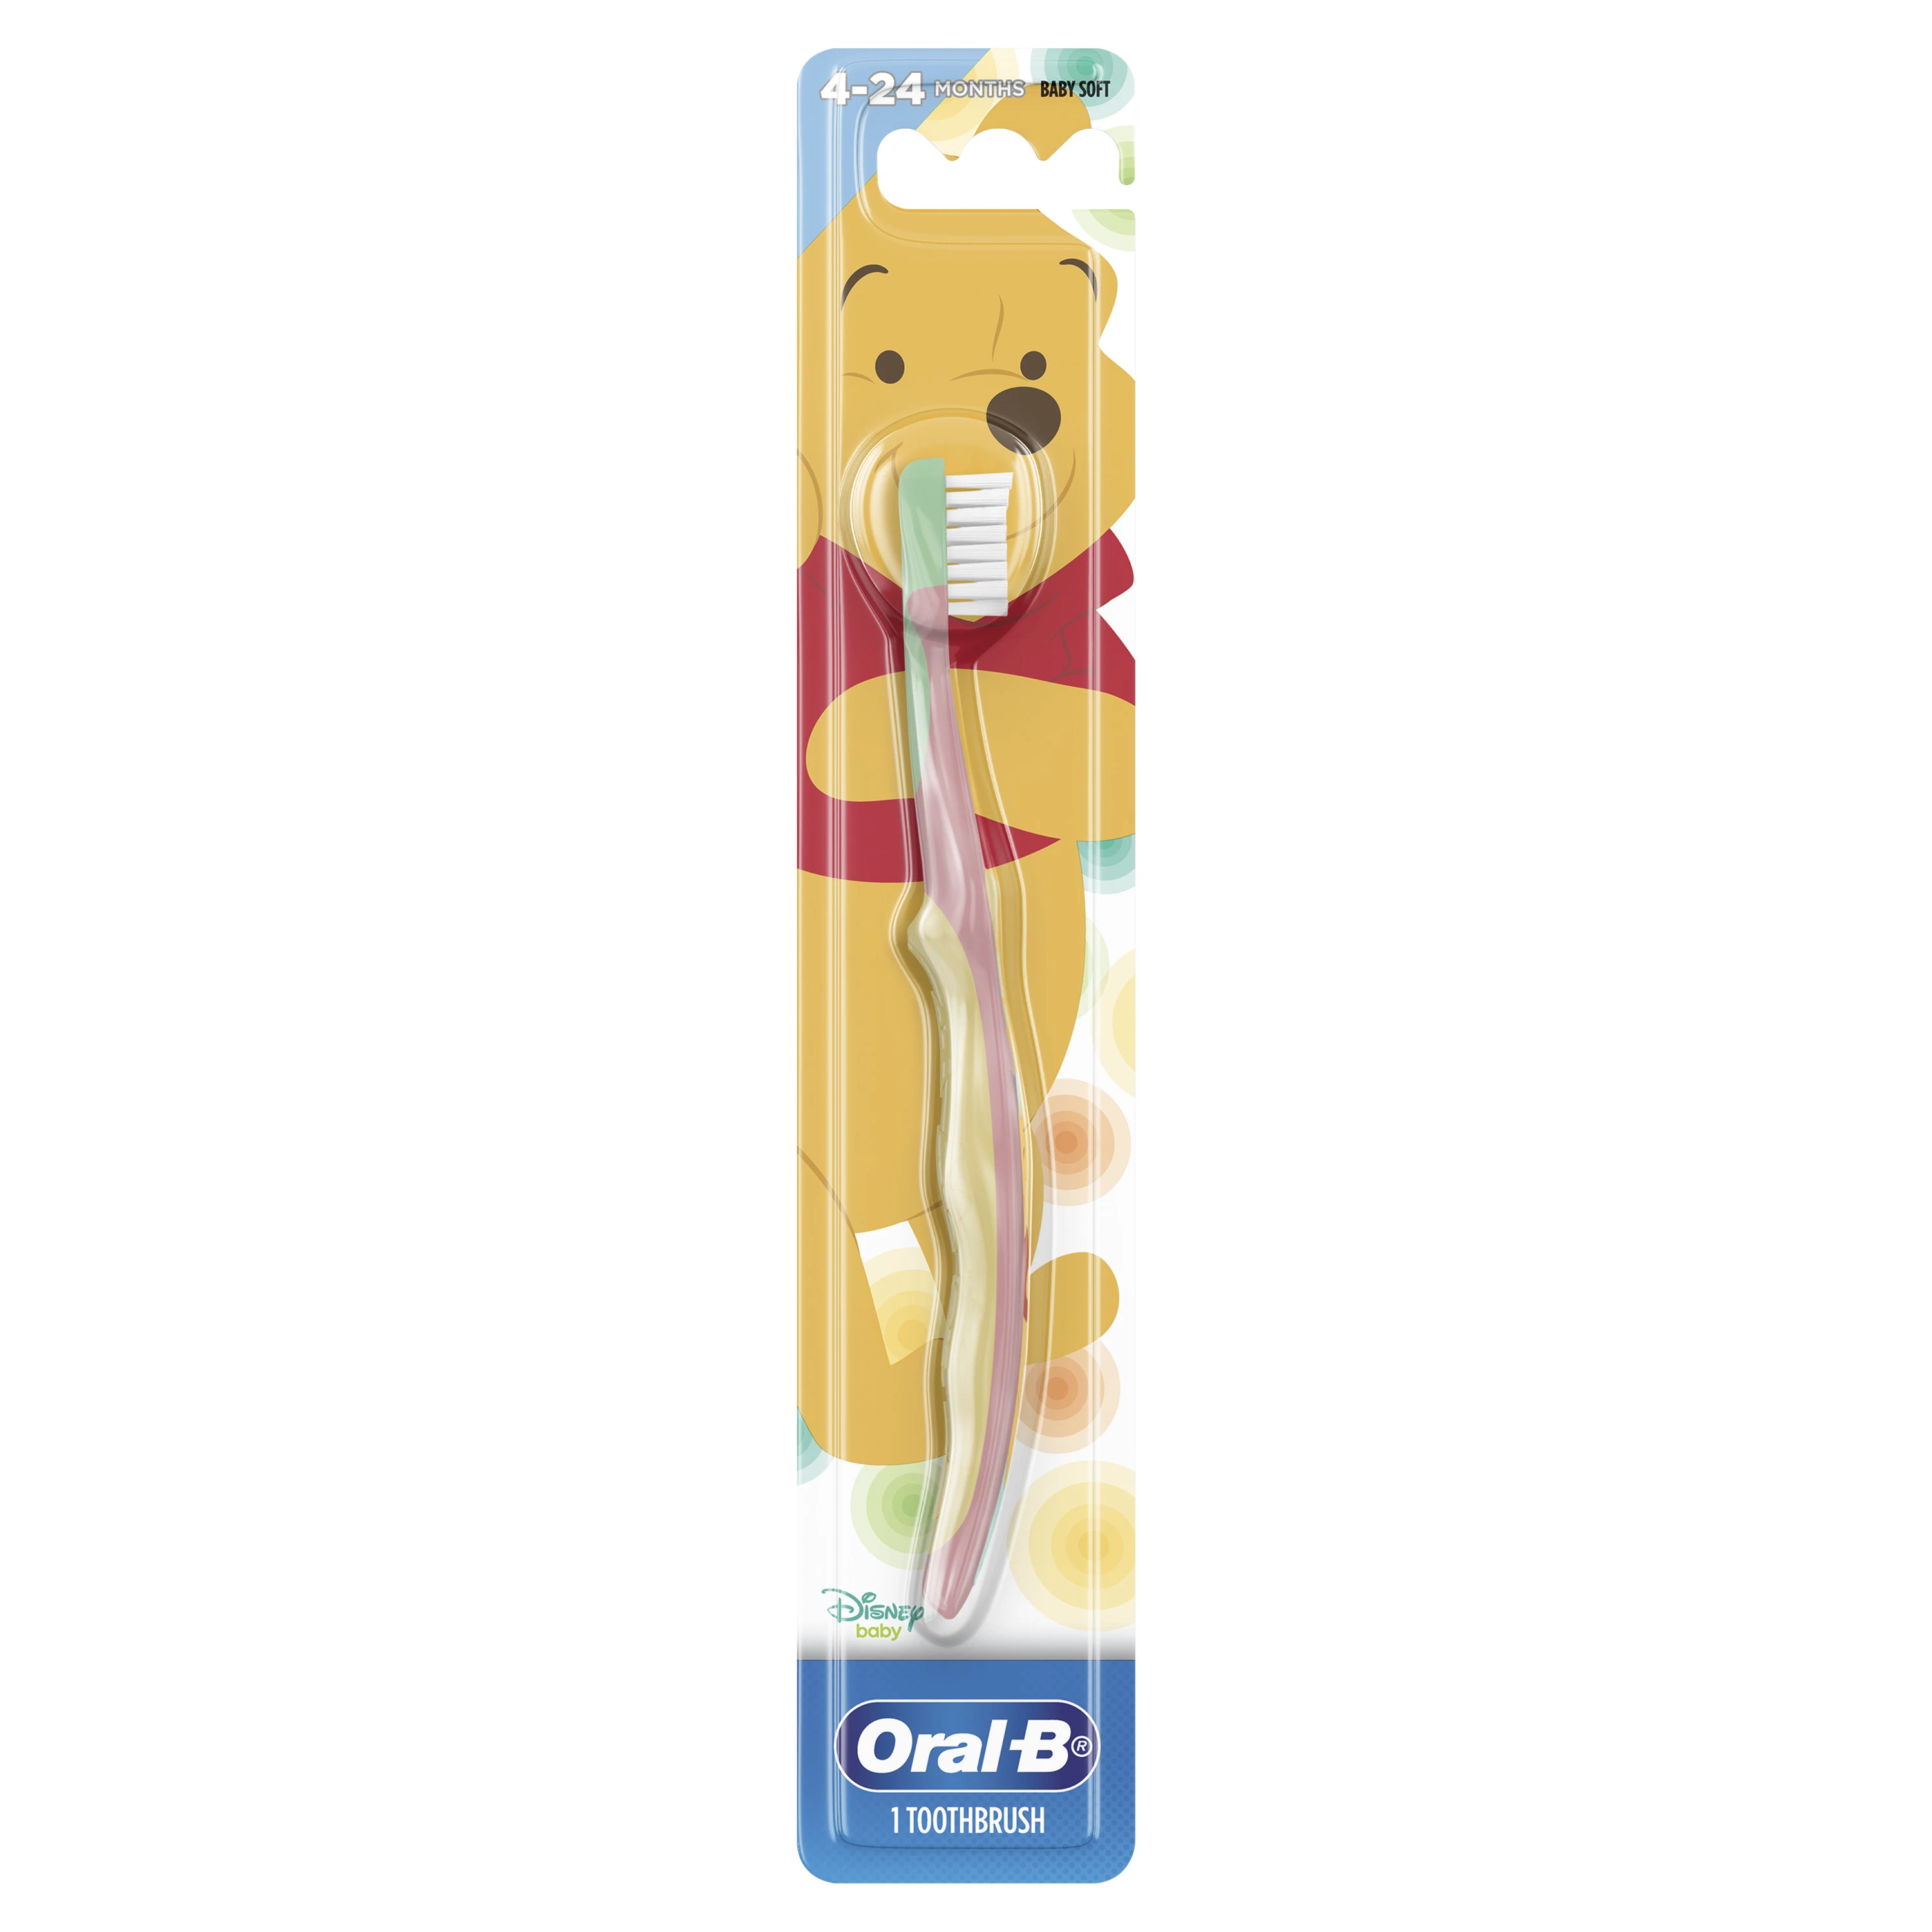 Oral-B Toothbrush, Stages 1 (4-24 Months) 